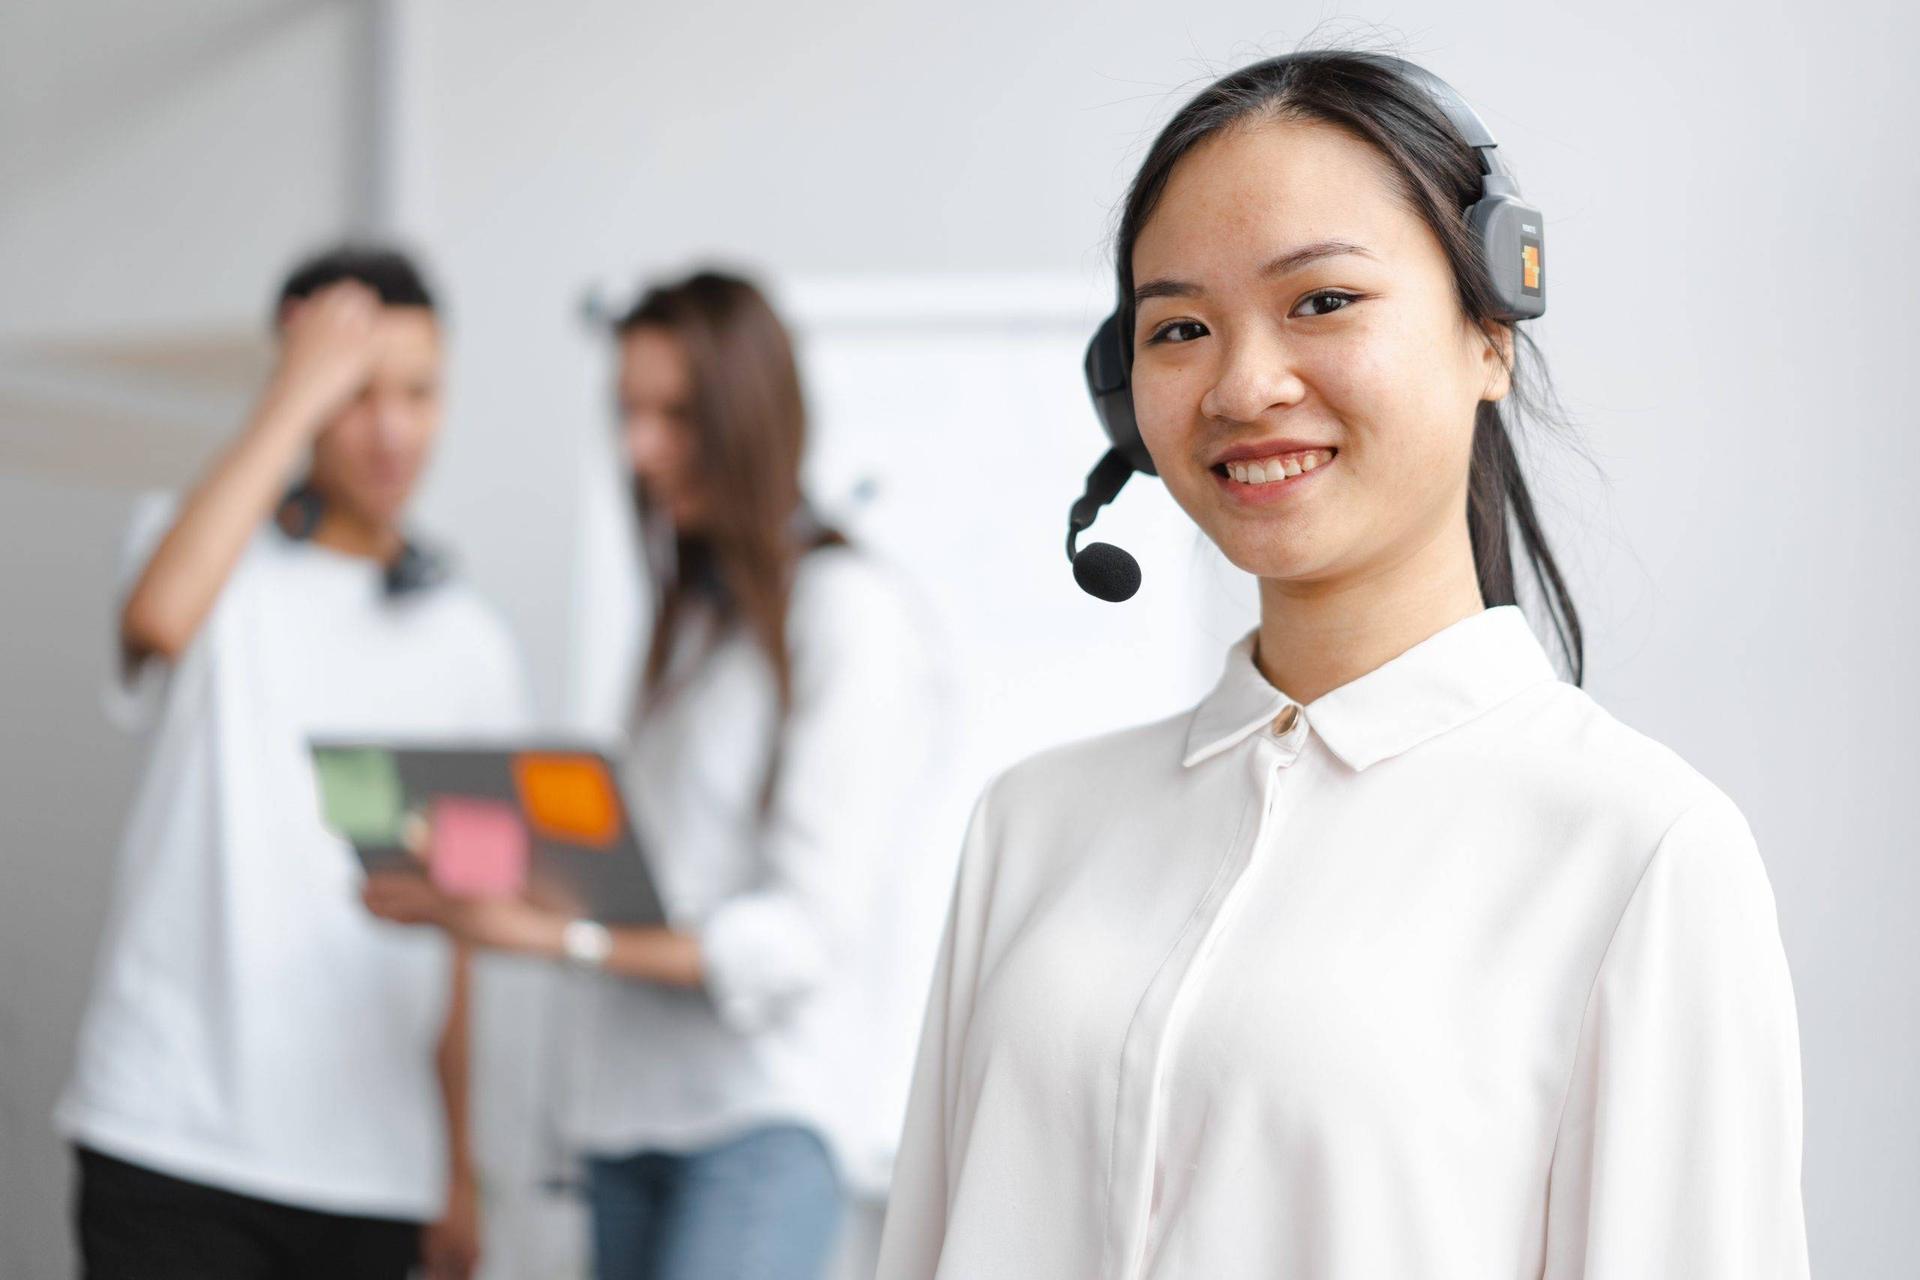 Virtual receptionist wearing headset stands in a white room as two people have a conversation in the background